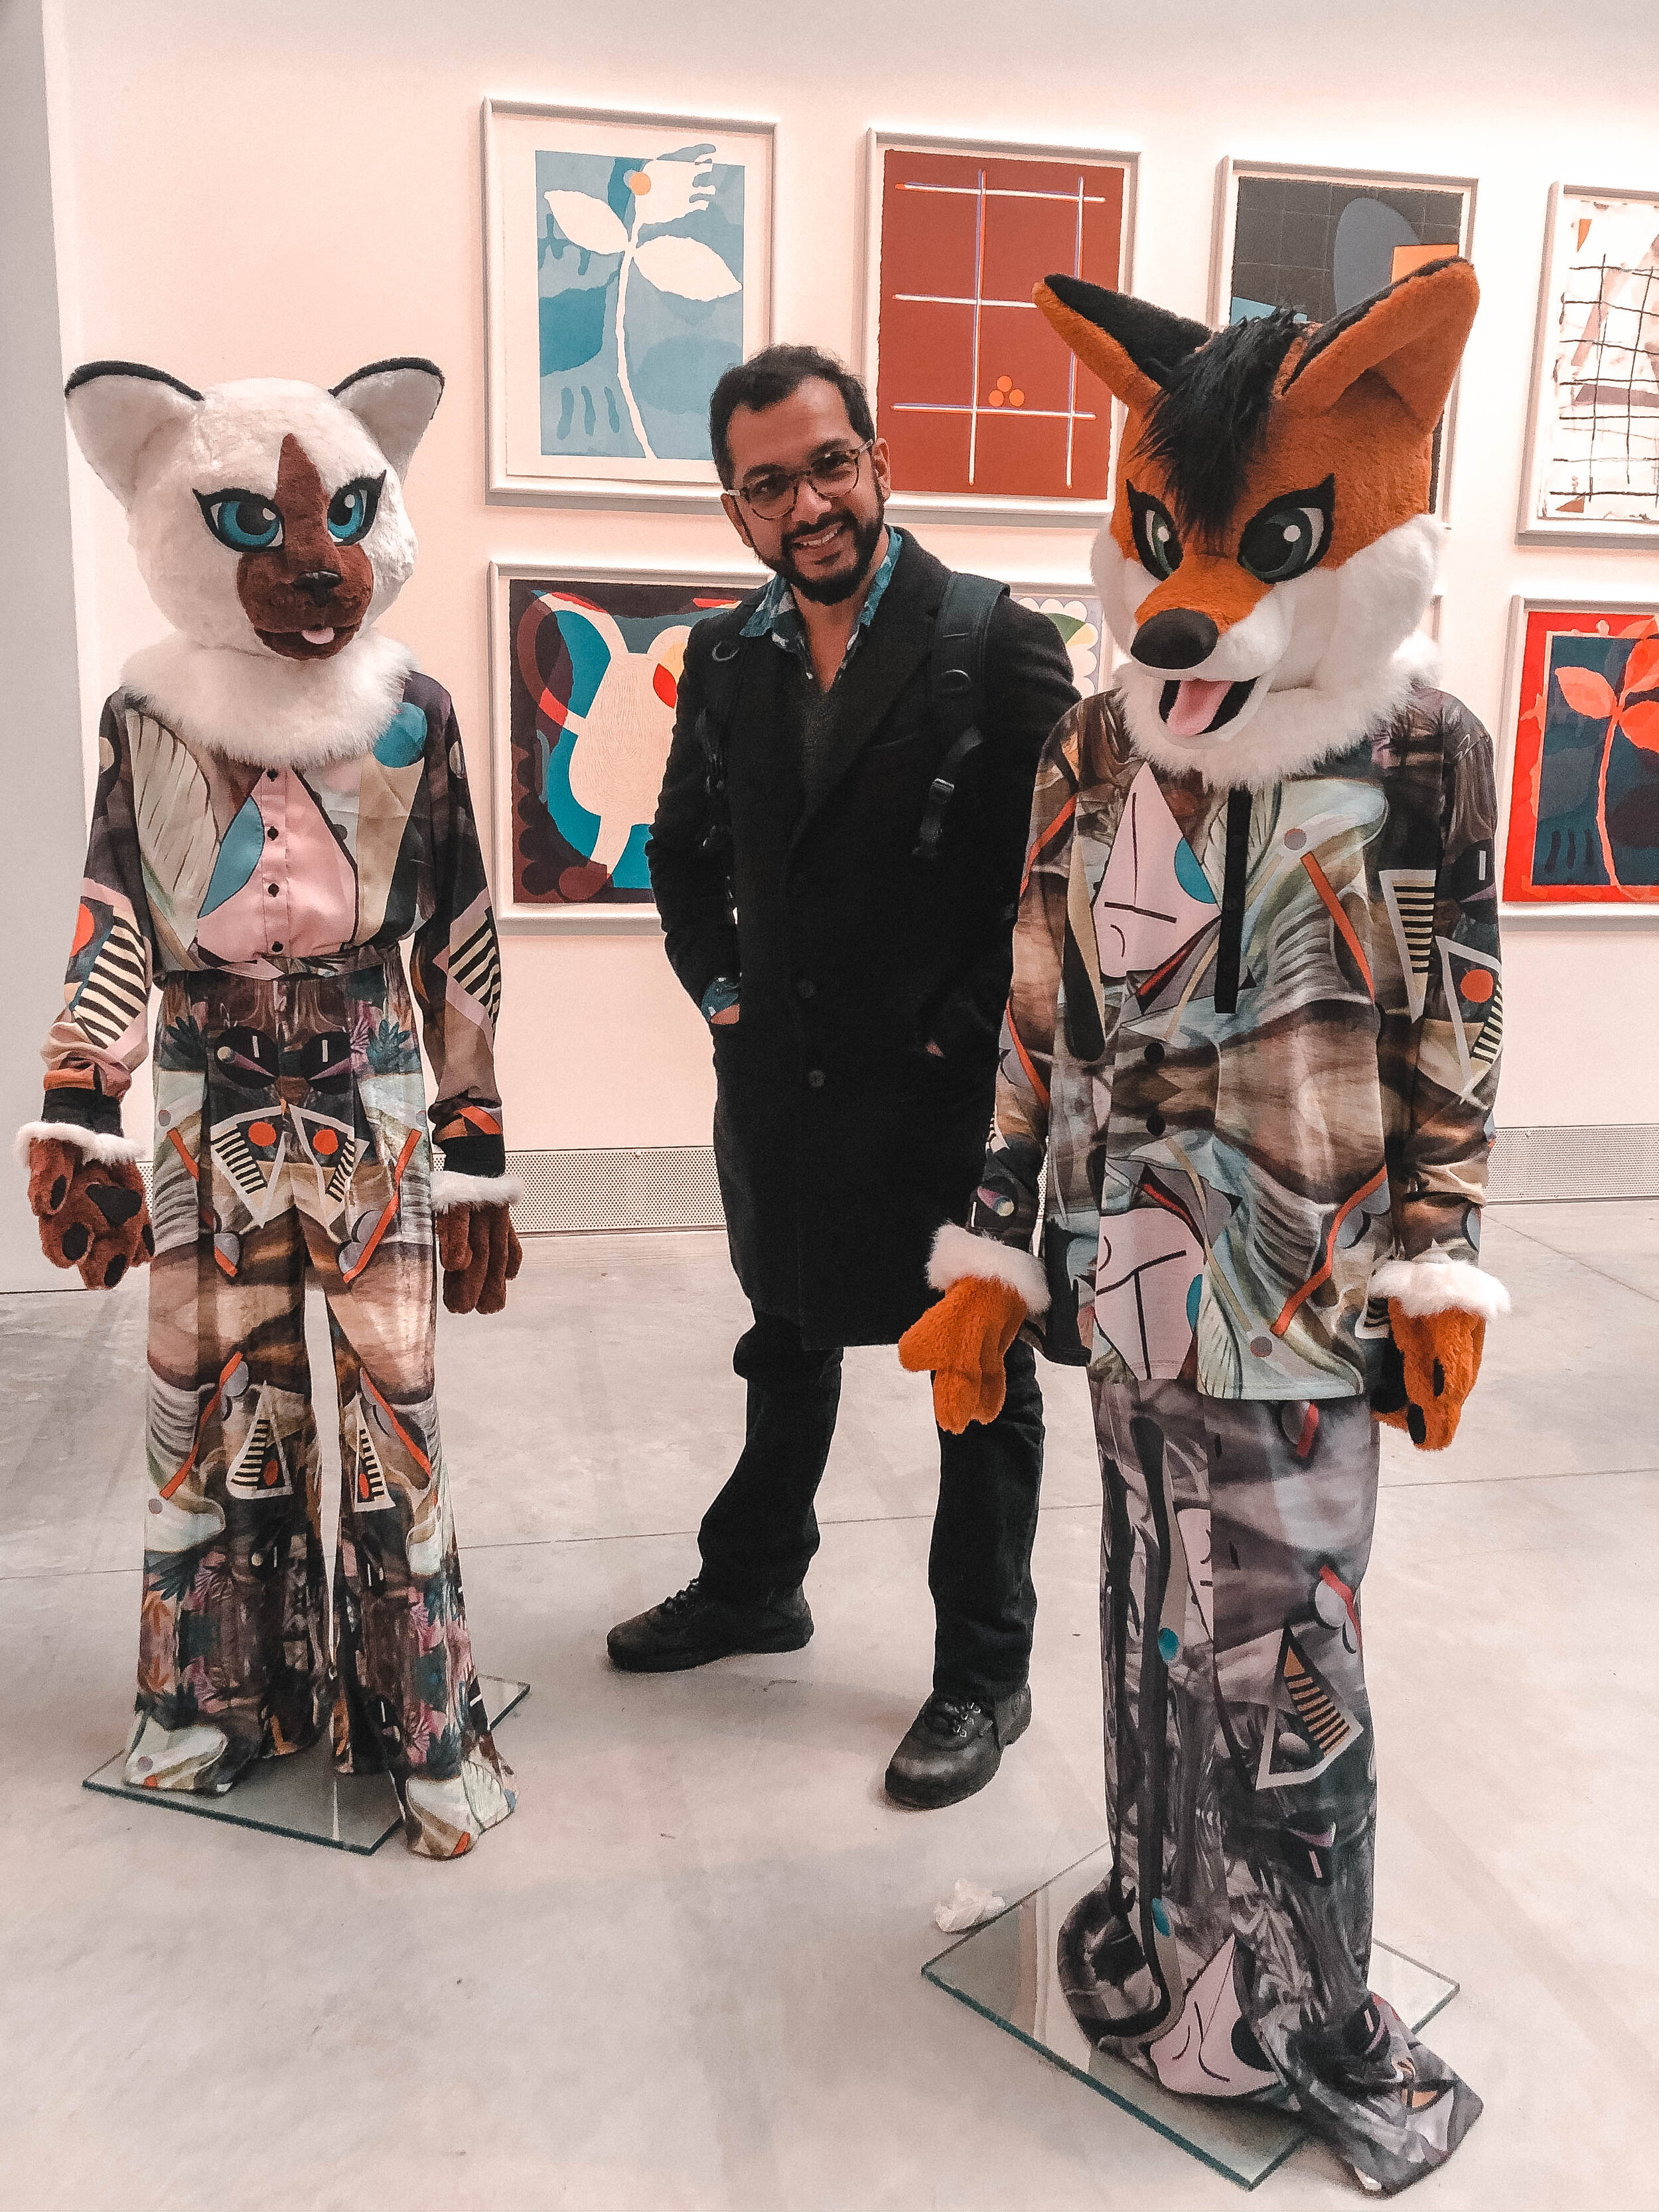 Art at Biennale 2019 in Venice Italy